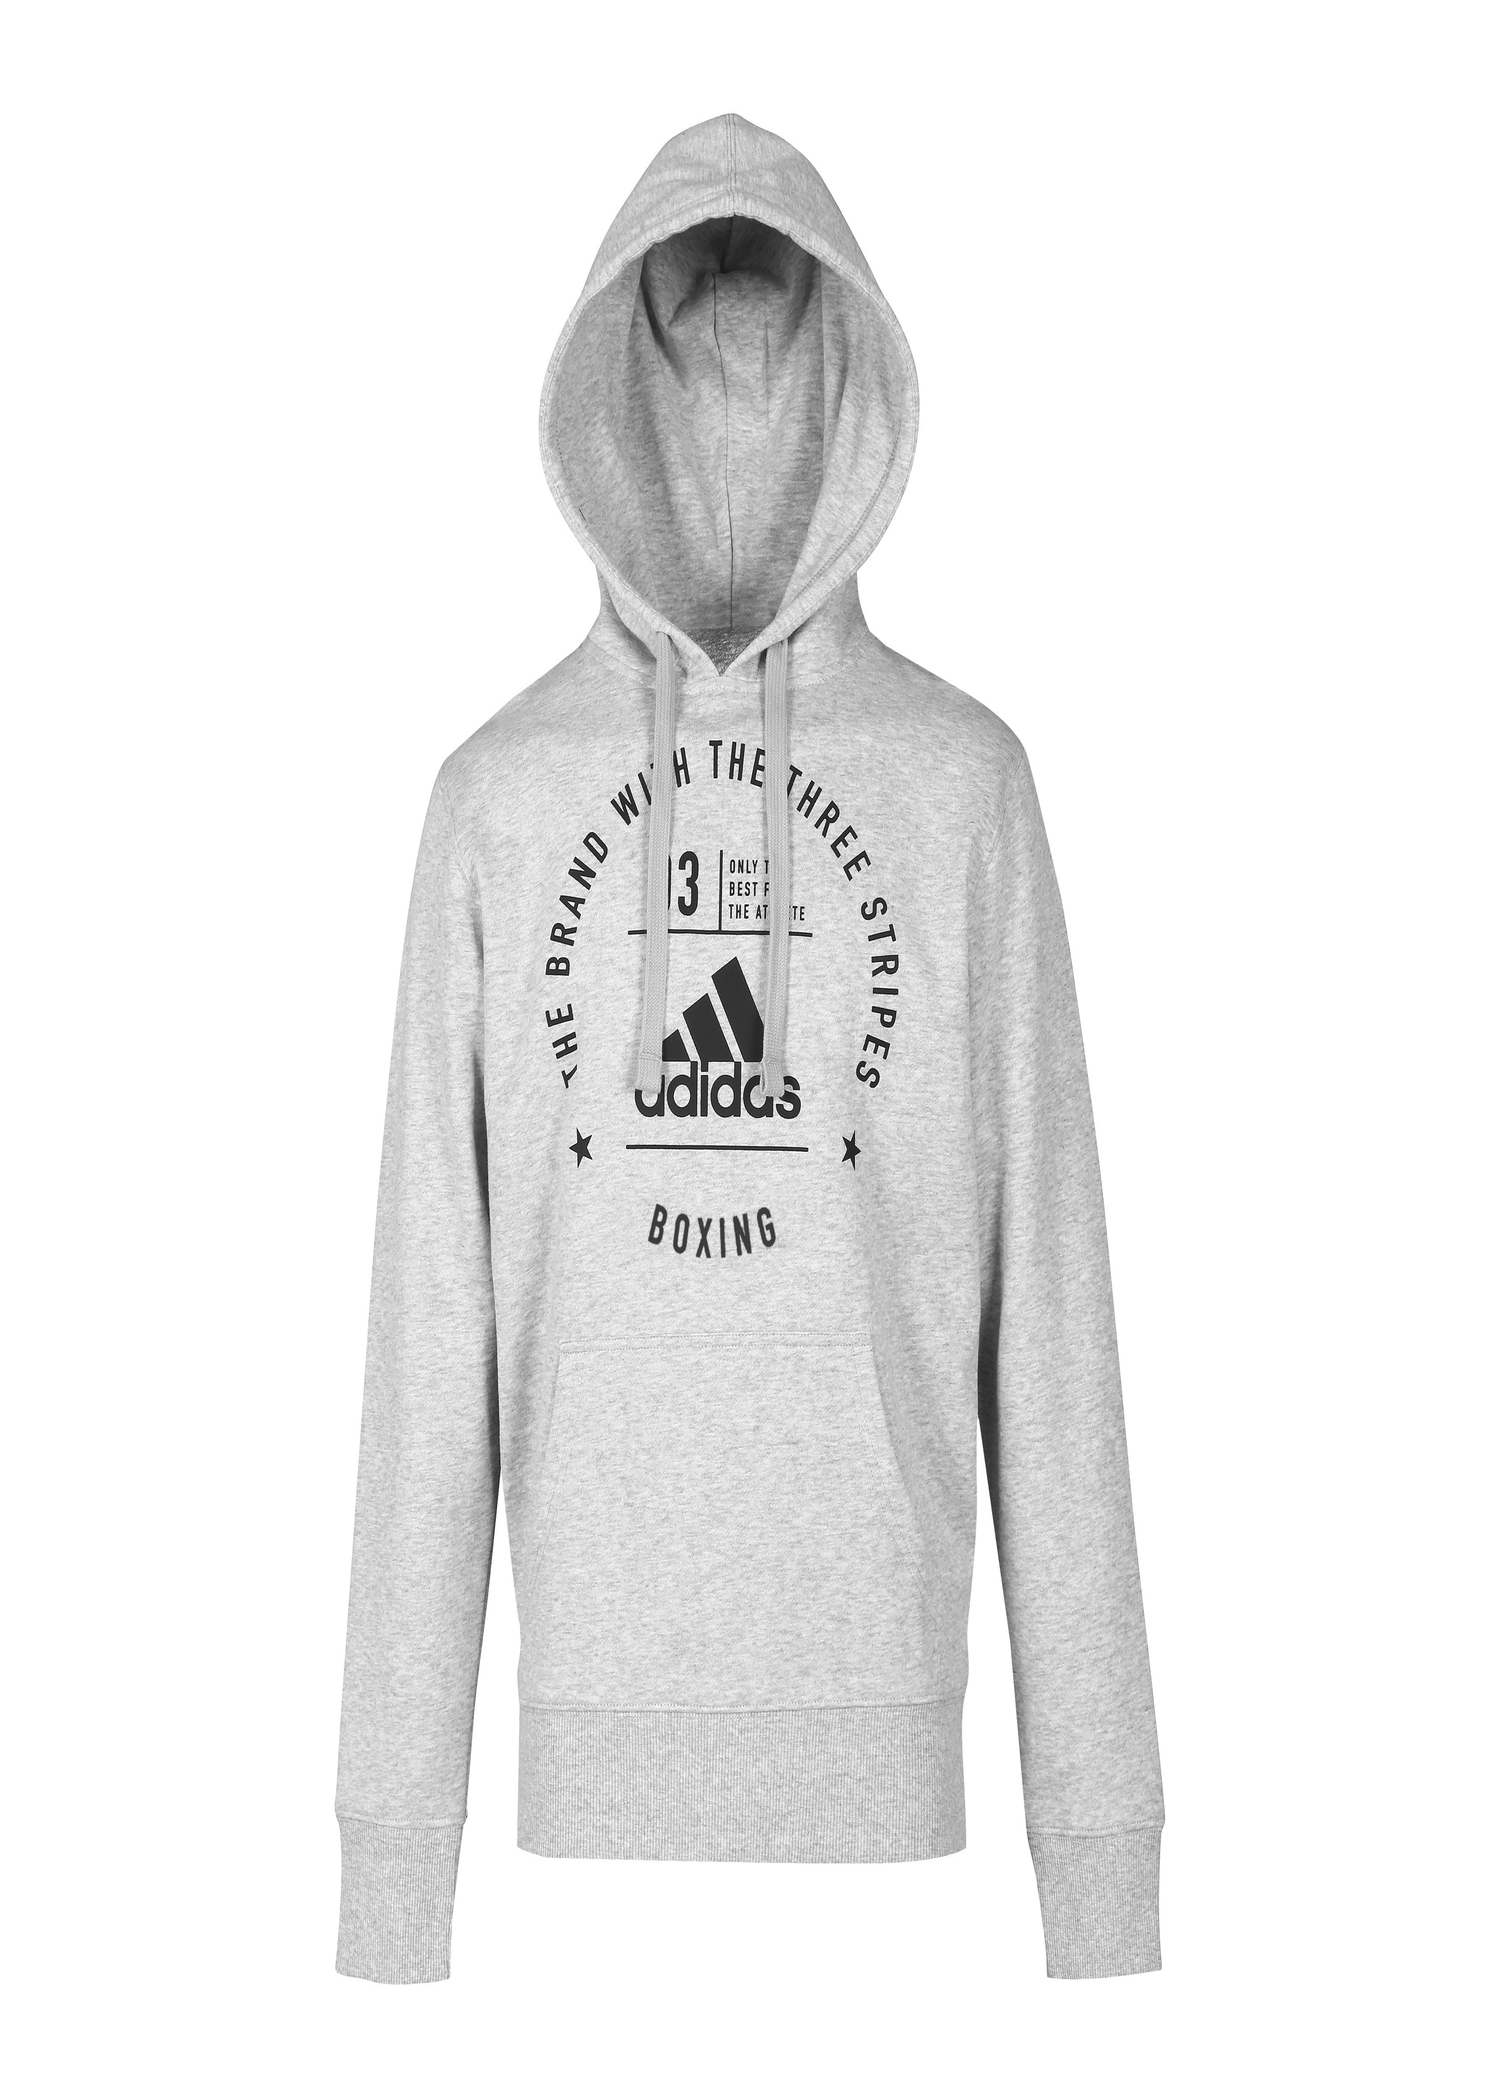 Work Man, Adidas for Gym, FightersShop Hoodie- for Woman, Unisex Boxing - — Community